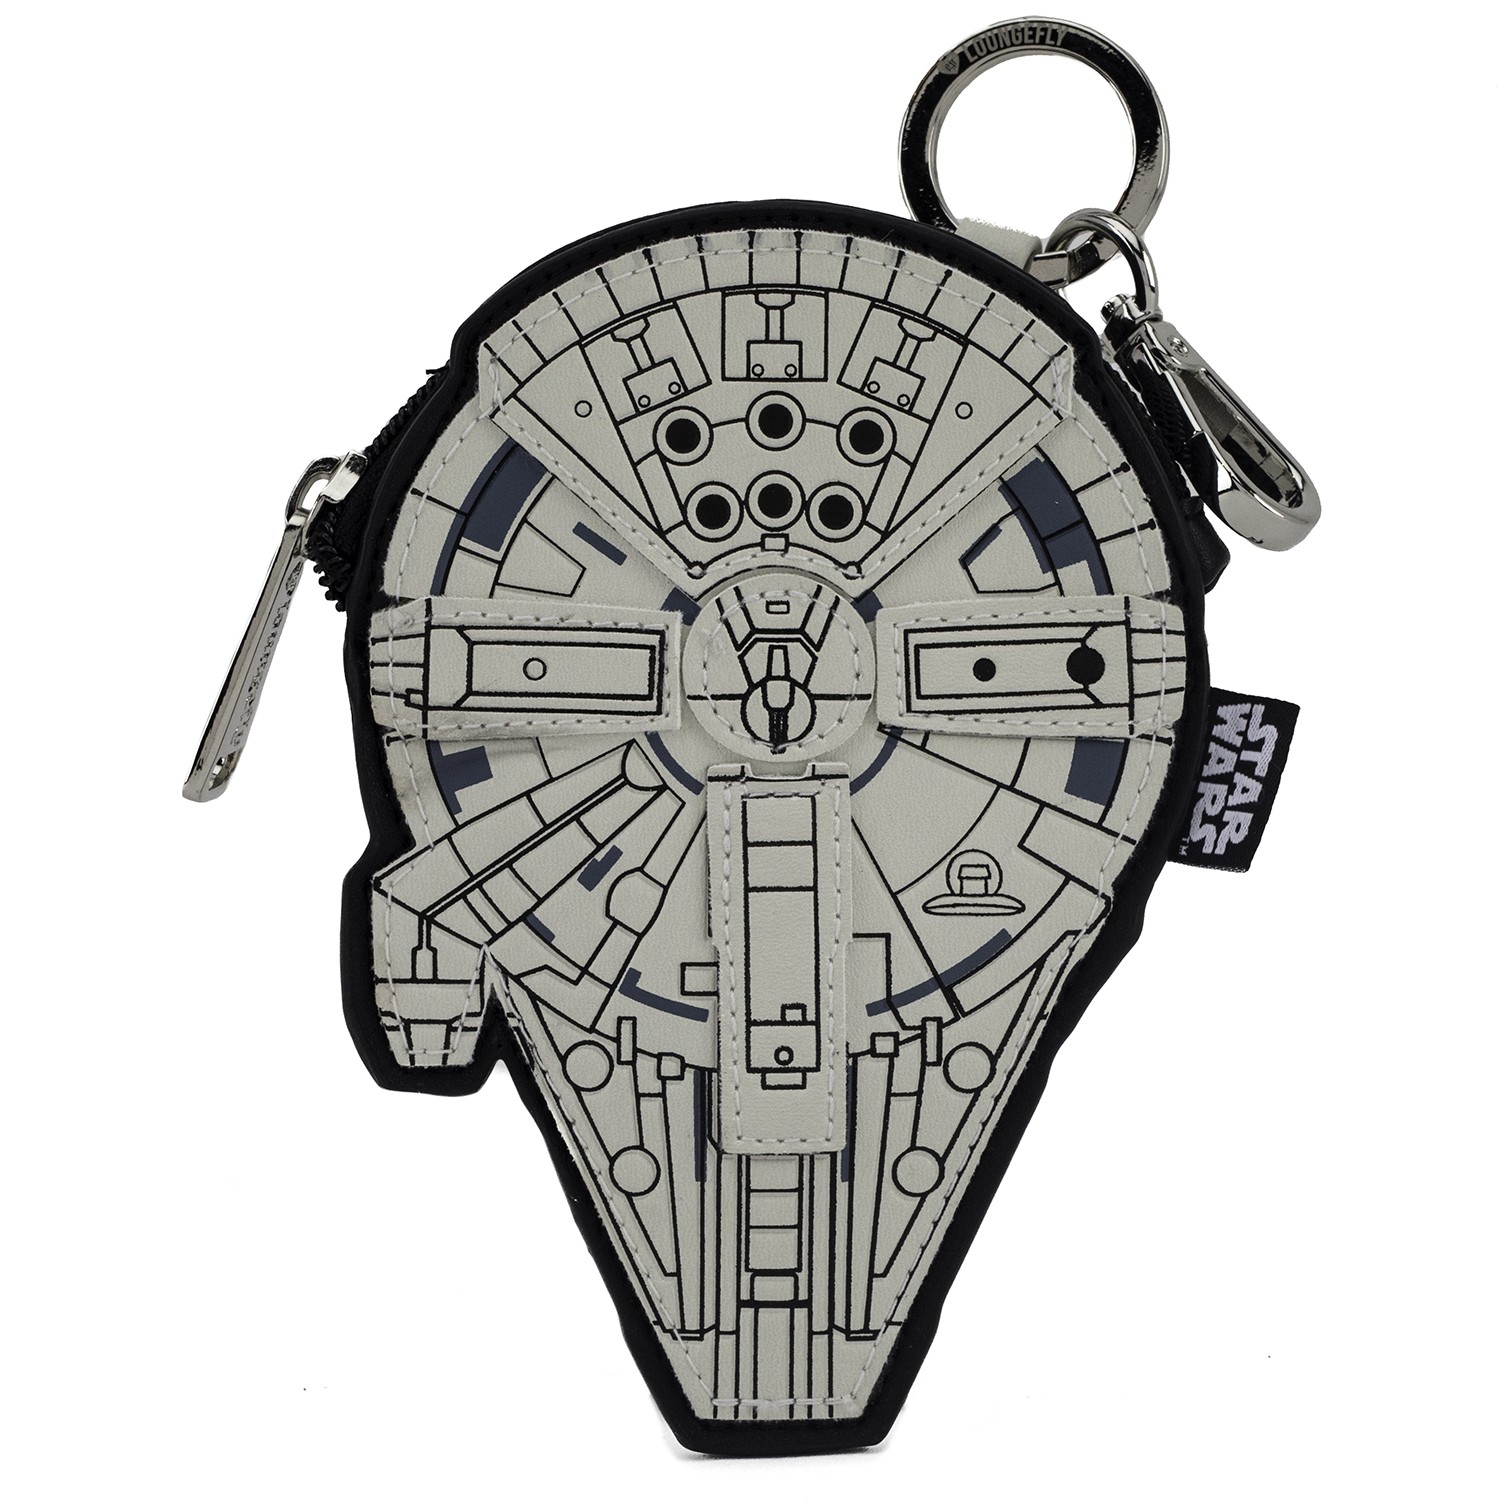 Loungefly x Star Wars Solo Millennium Falcon Faux Leather Coin Purse